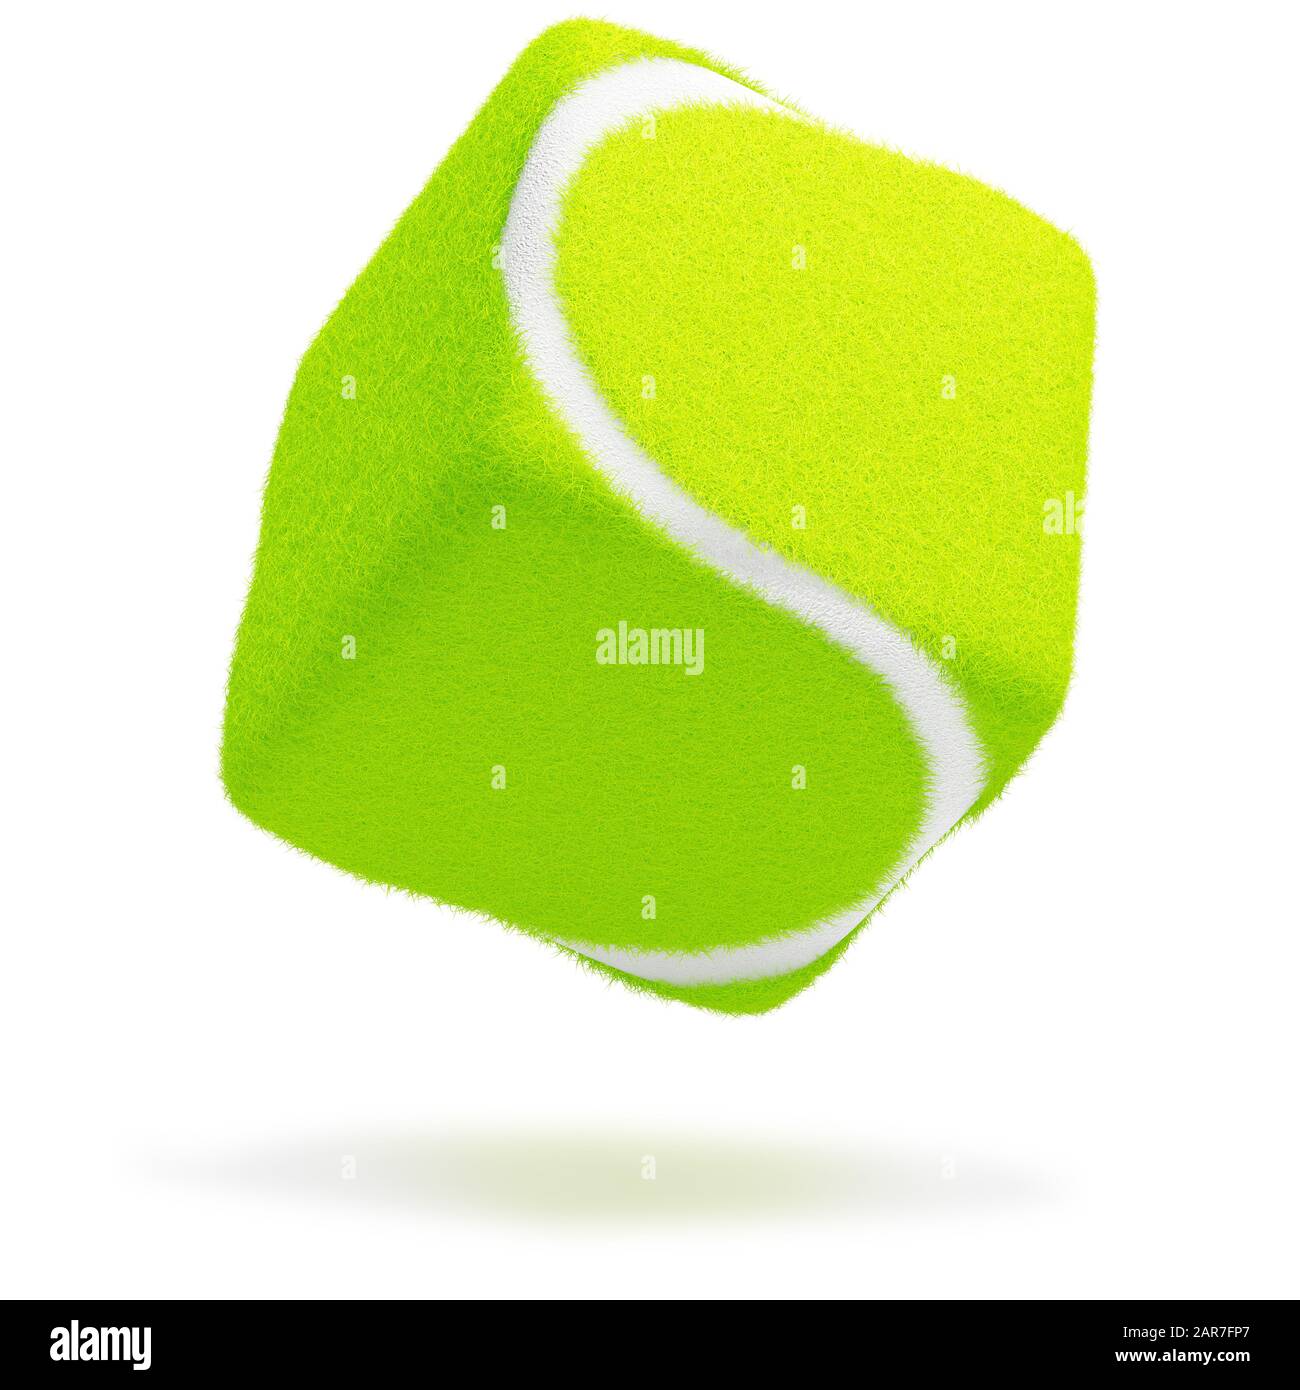 Surreal Tennis Ball bouncing on a white background Stock Photo